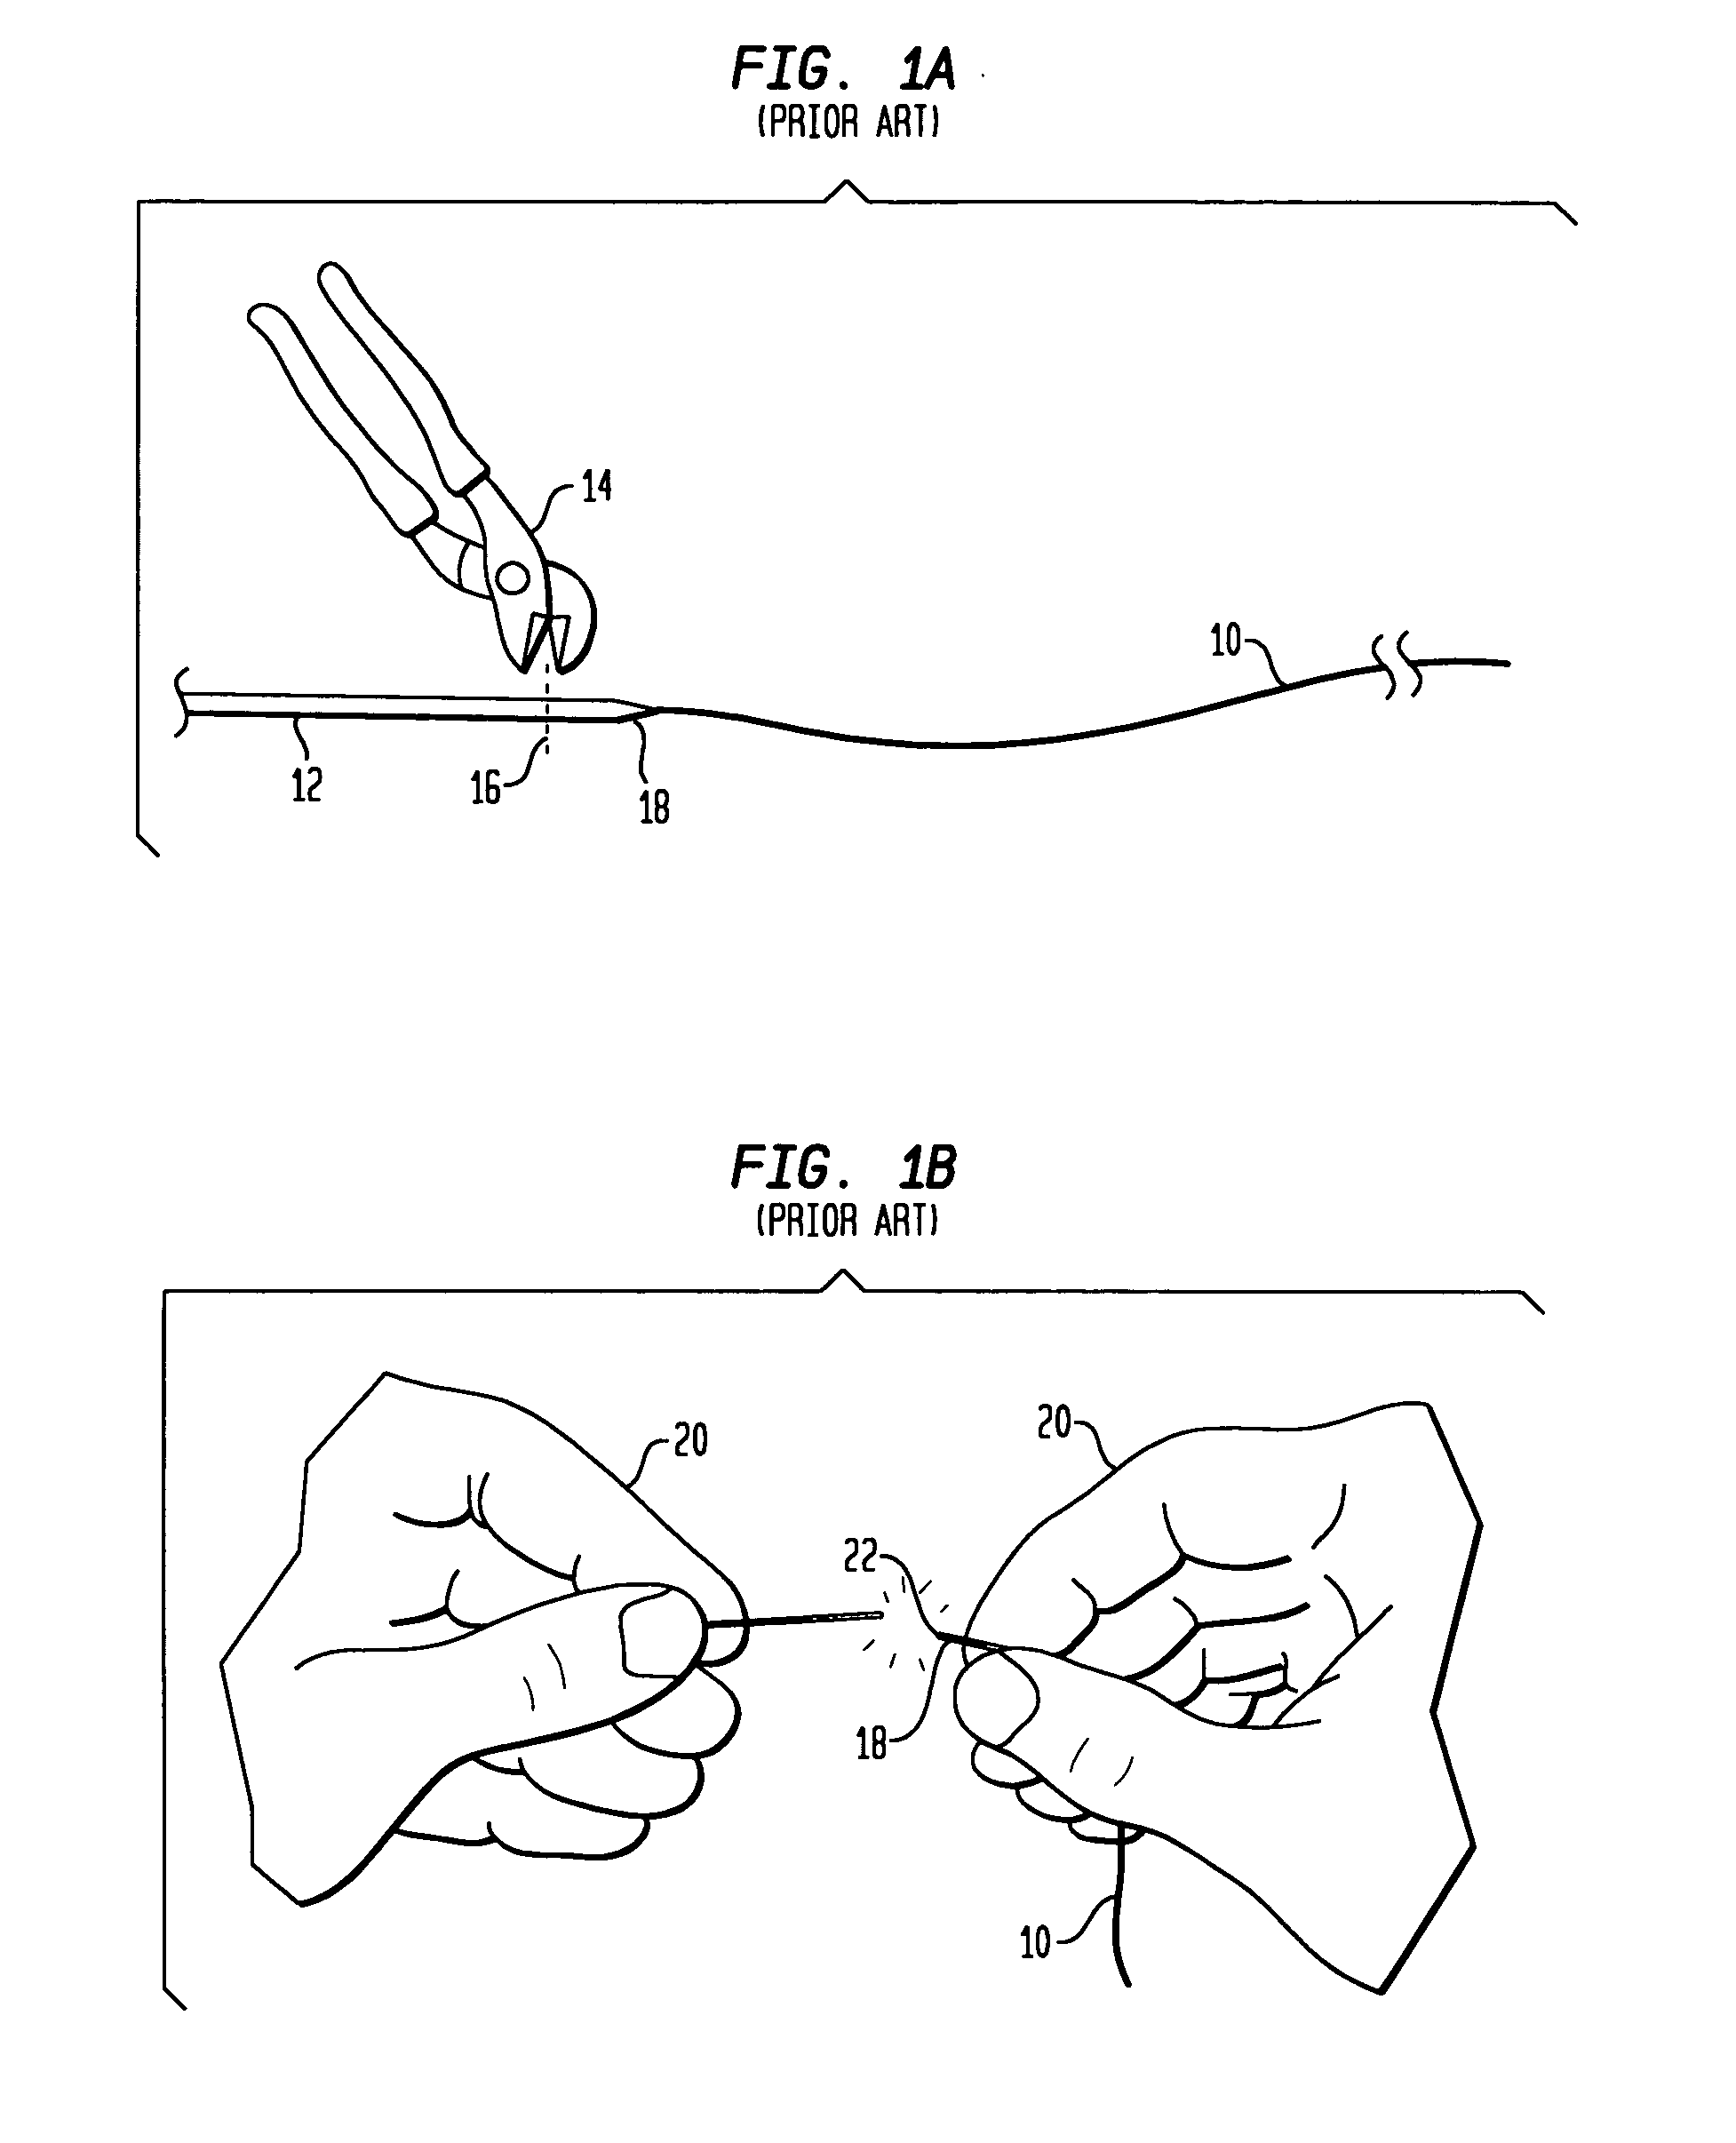 Electrical connector to terminate, insulate and environmentally isolate multiple temporary cardiac pacing wires